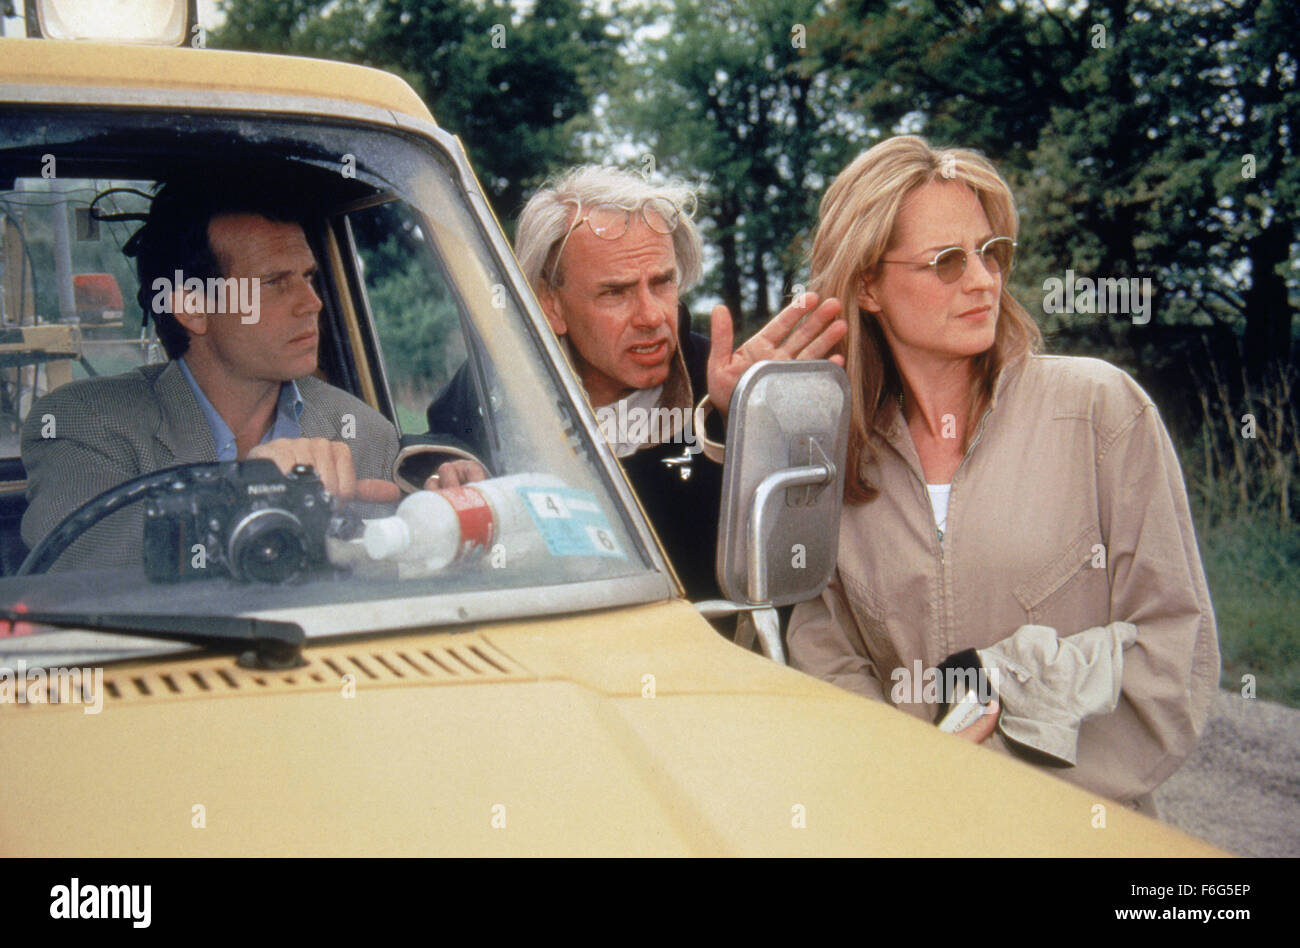 RELEASE DATE: 10 May 1996. MOVIE TITLE: Twister STUDIO: Universal Pictures. PLOT: A couple on the point of divorce keep meeting each other because both are researchers who chase tornadoes. PICTURED: BILL PAXTON as Bill Harding with Director JAN DE BONT and HELEN HUNT as Dr. Jo Harding. Stock Photo